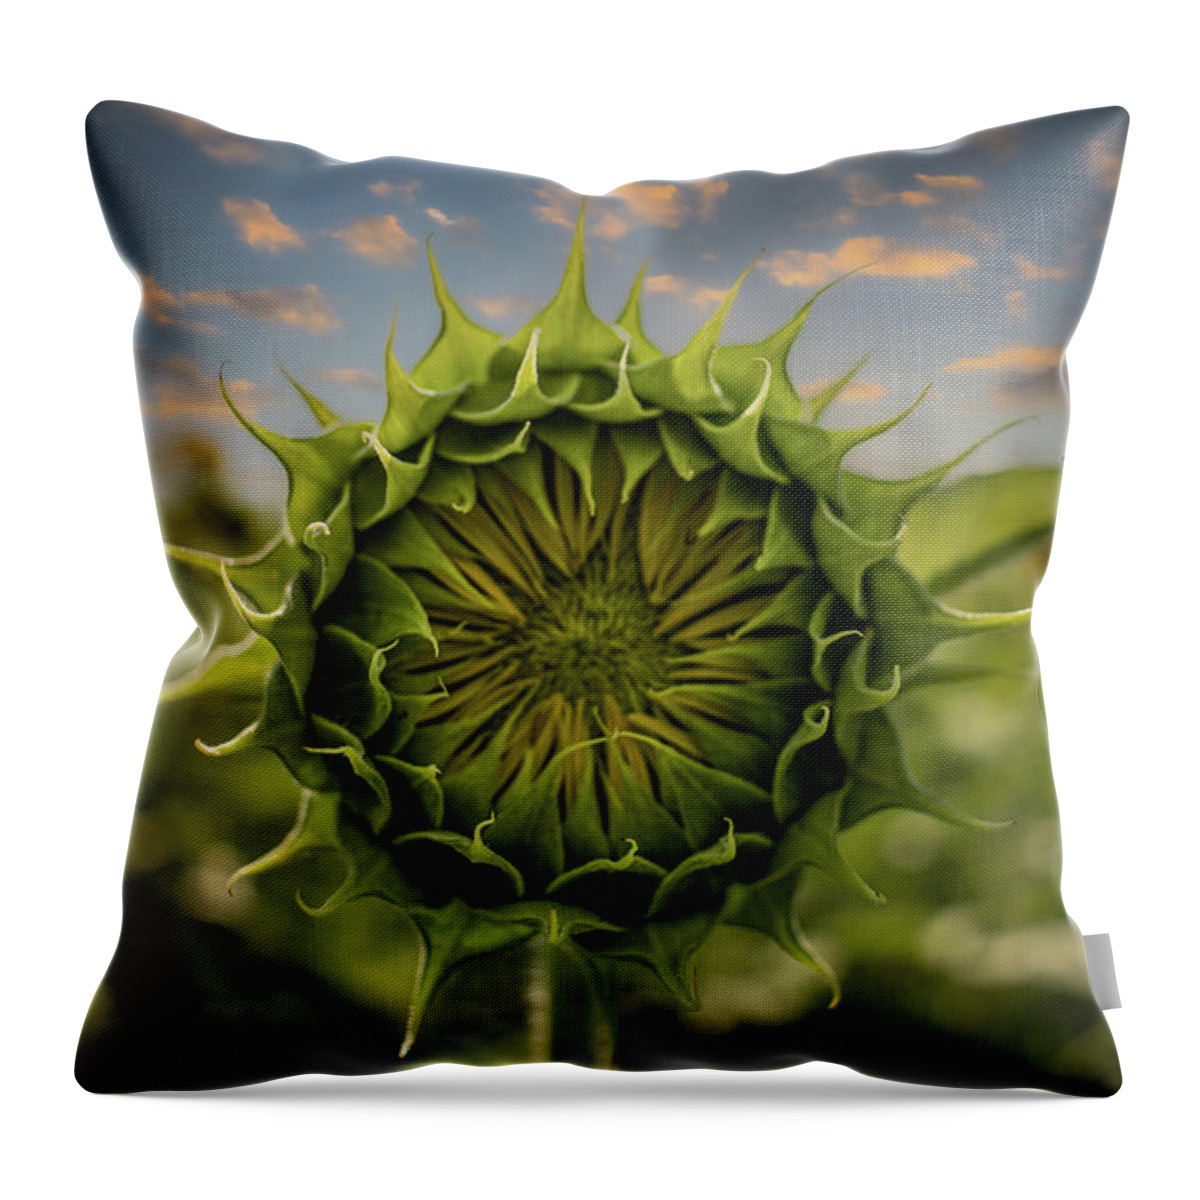 Sunflower Throw Pillow featuring the photograph About To Pop Out by Rick Nelson